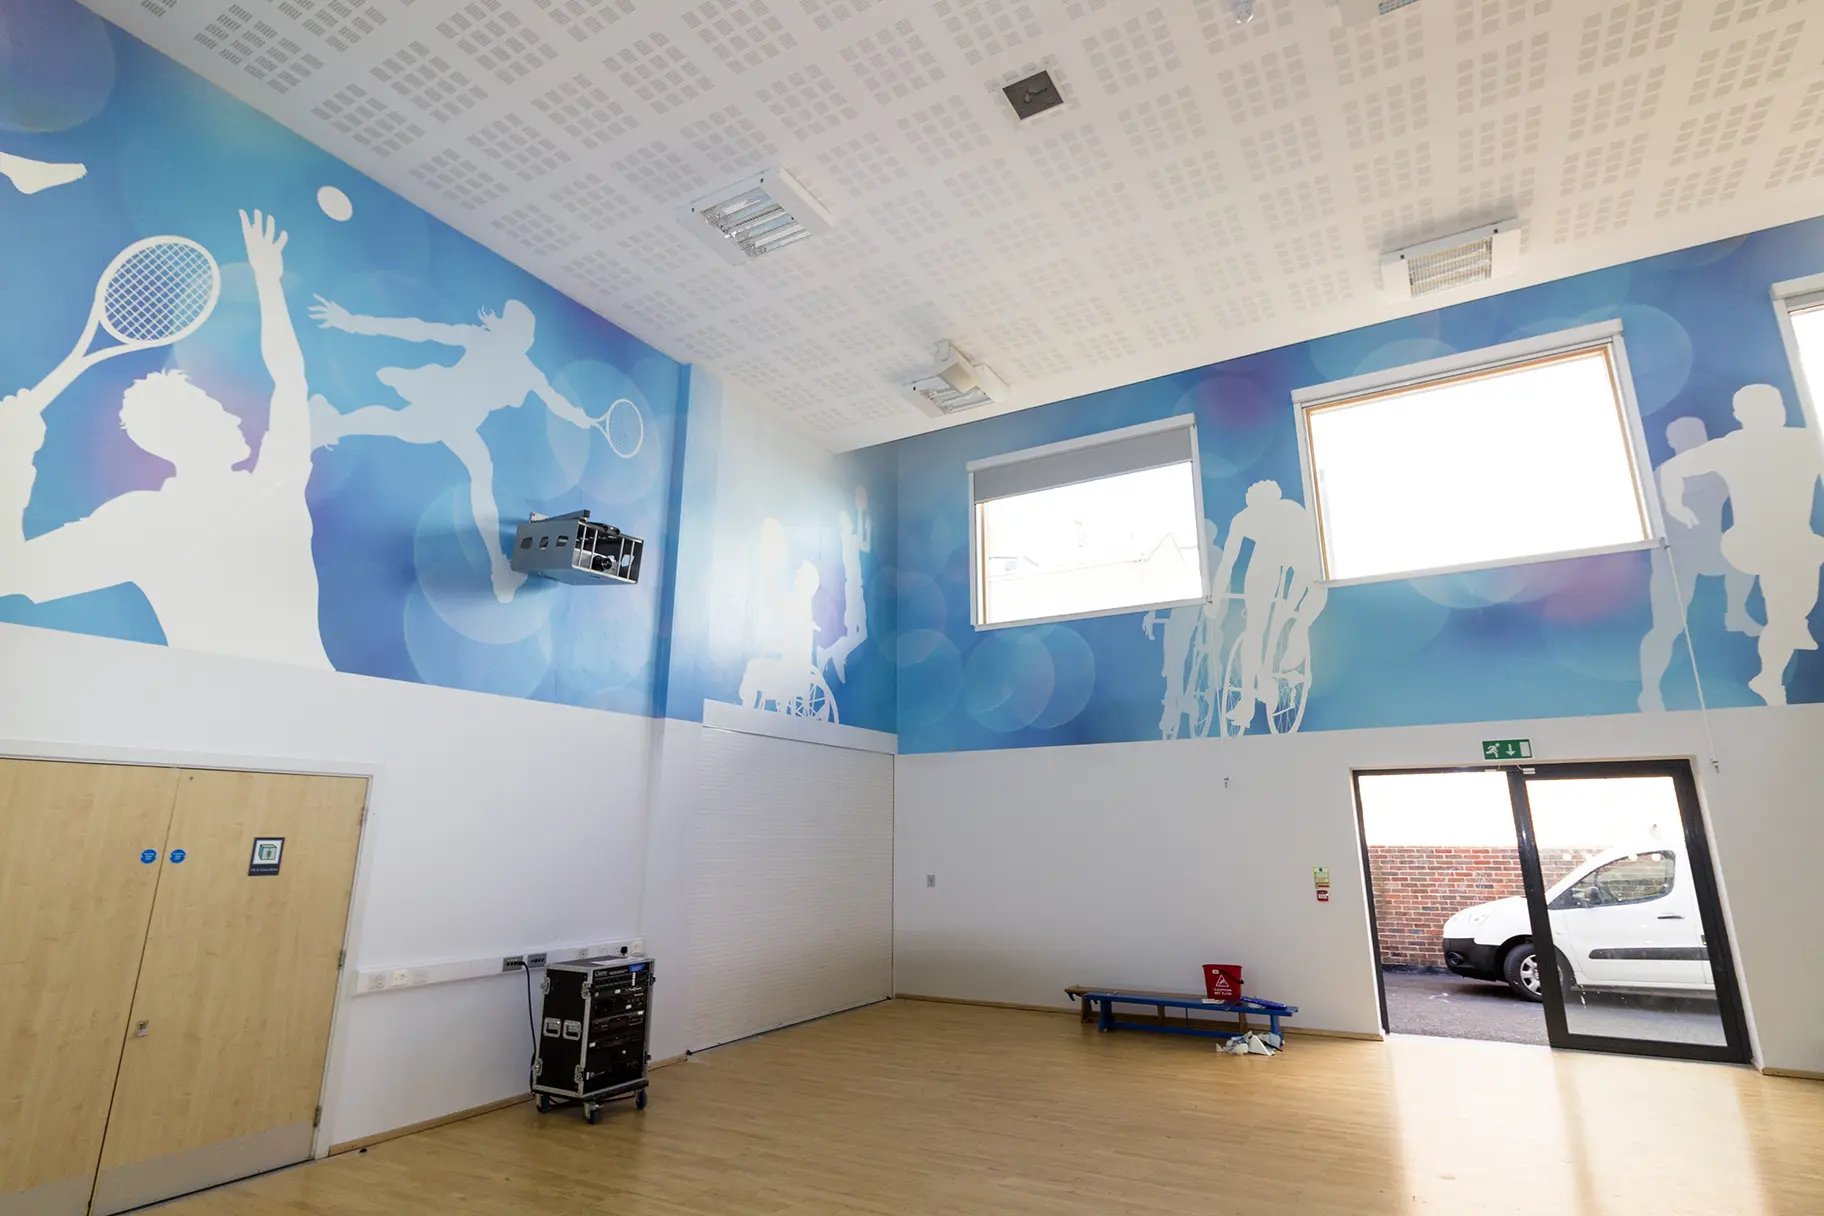 College Park School sports hall brought to life with Wall Art